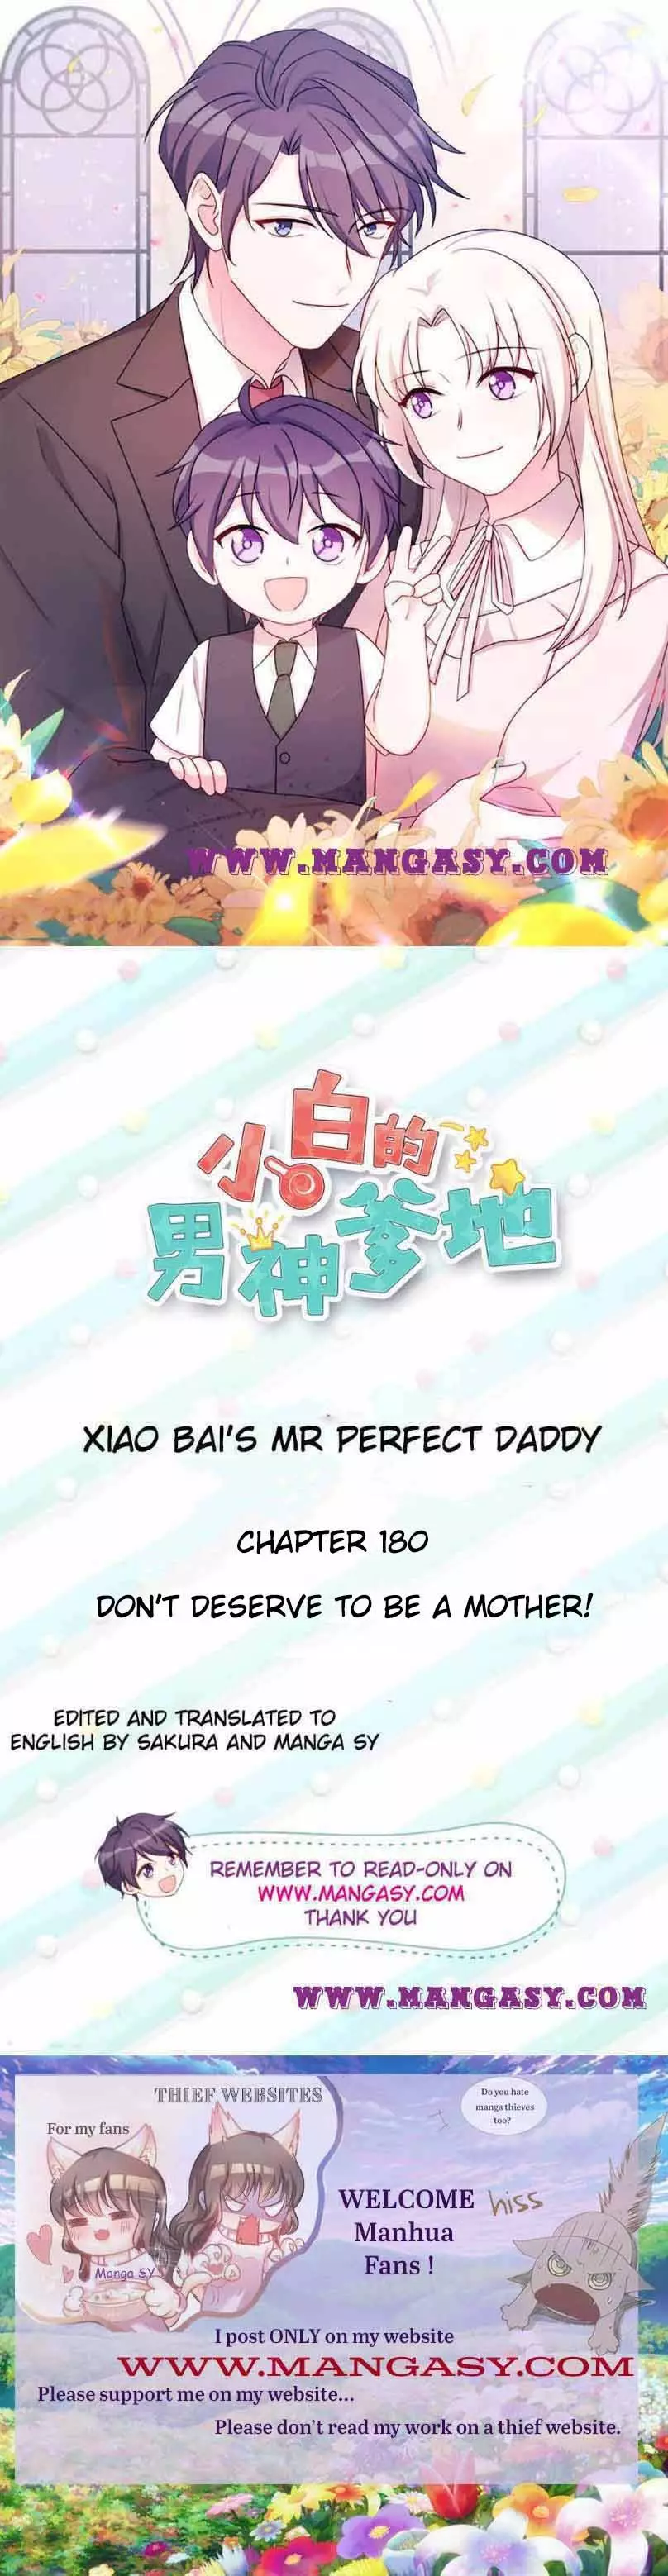 Xiao Bai’S Father Is A Wonderful Person - 180 page 1-b2b9b837